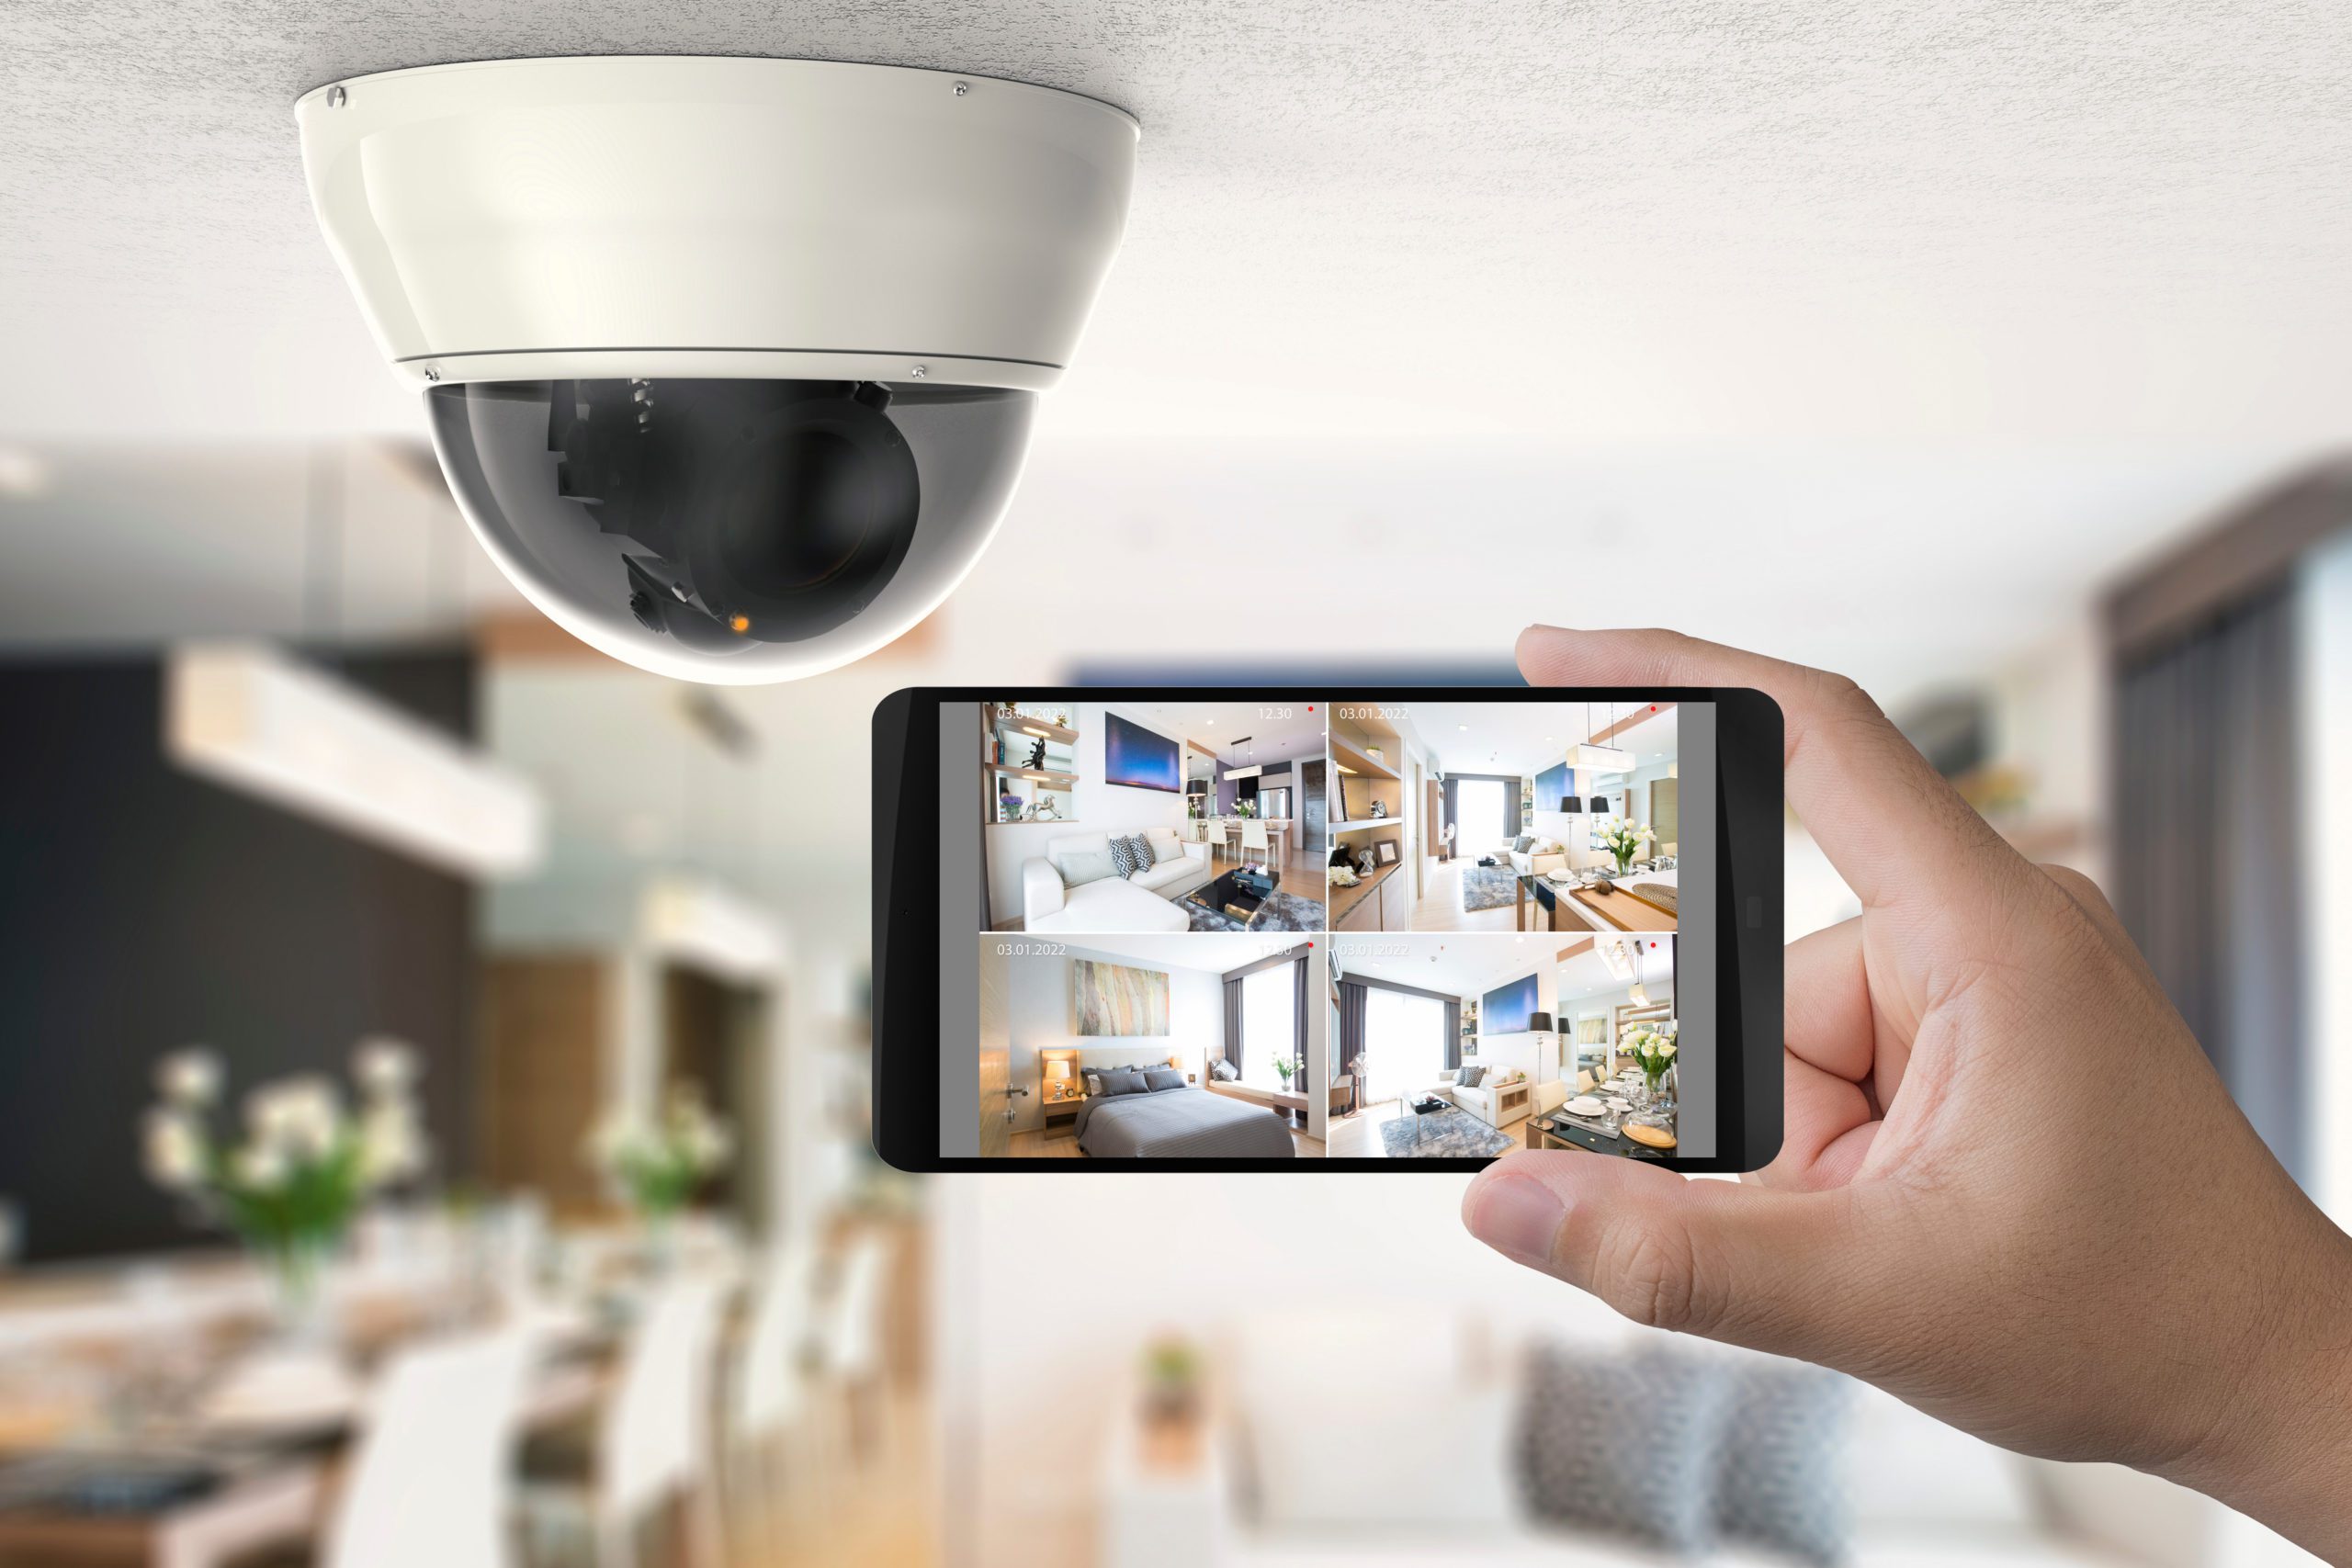 Smart home security guide